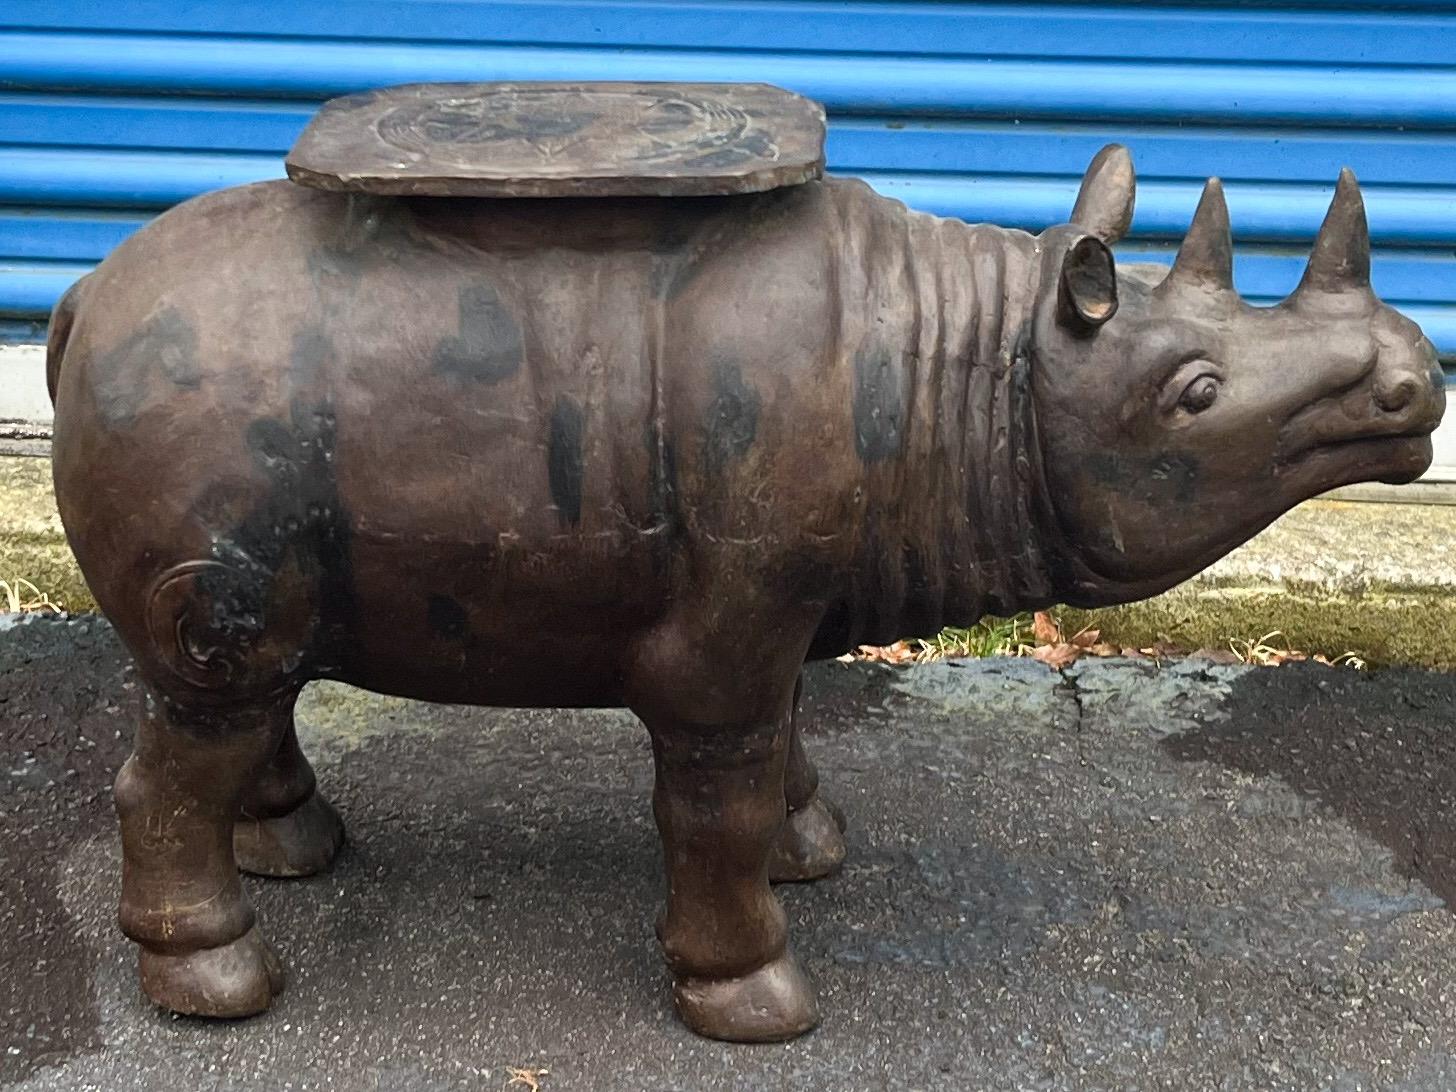 This is a late 20th century cast bronze rhinoceros side table / garden seat attributed to Maitland-Smith. What a conversation piece! He is unmarked and in very good condition.